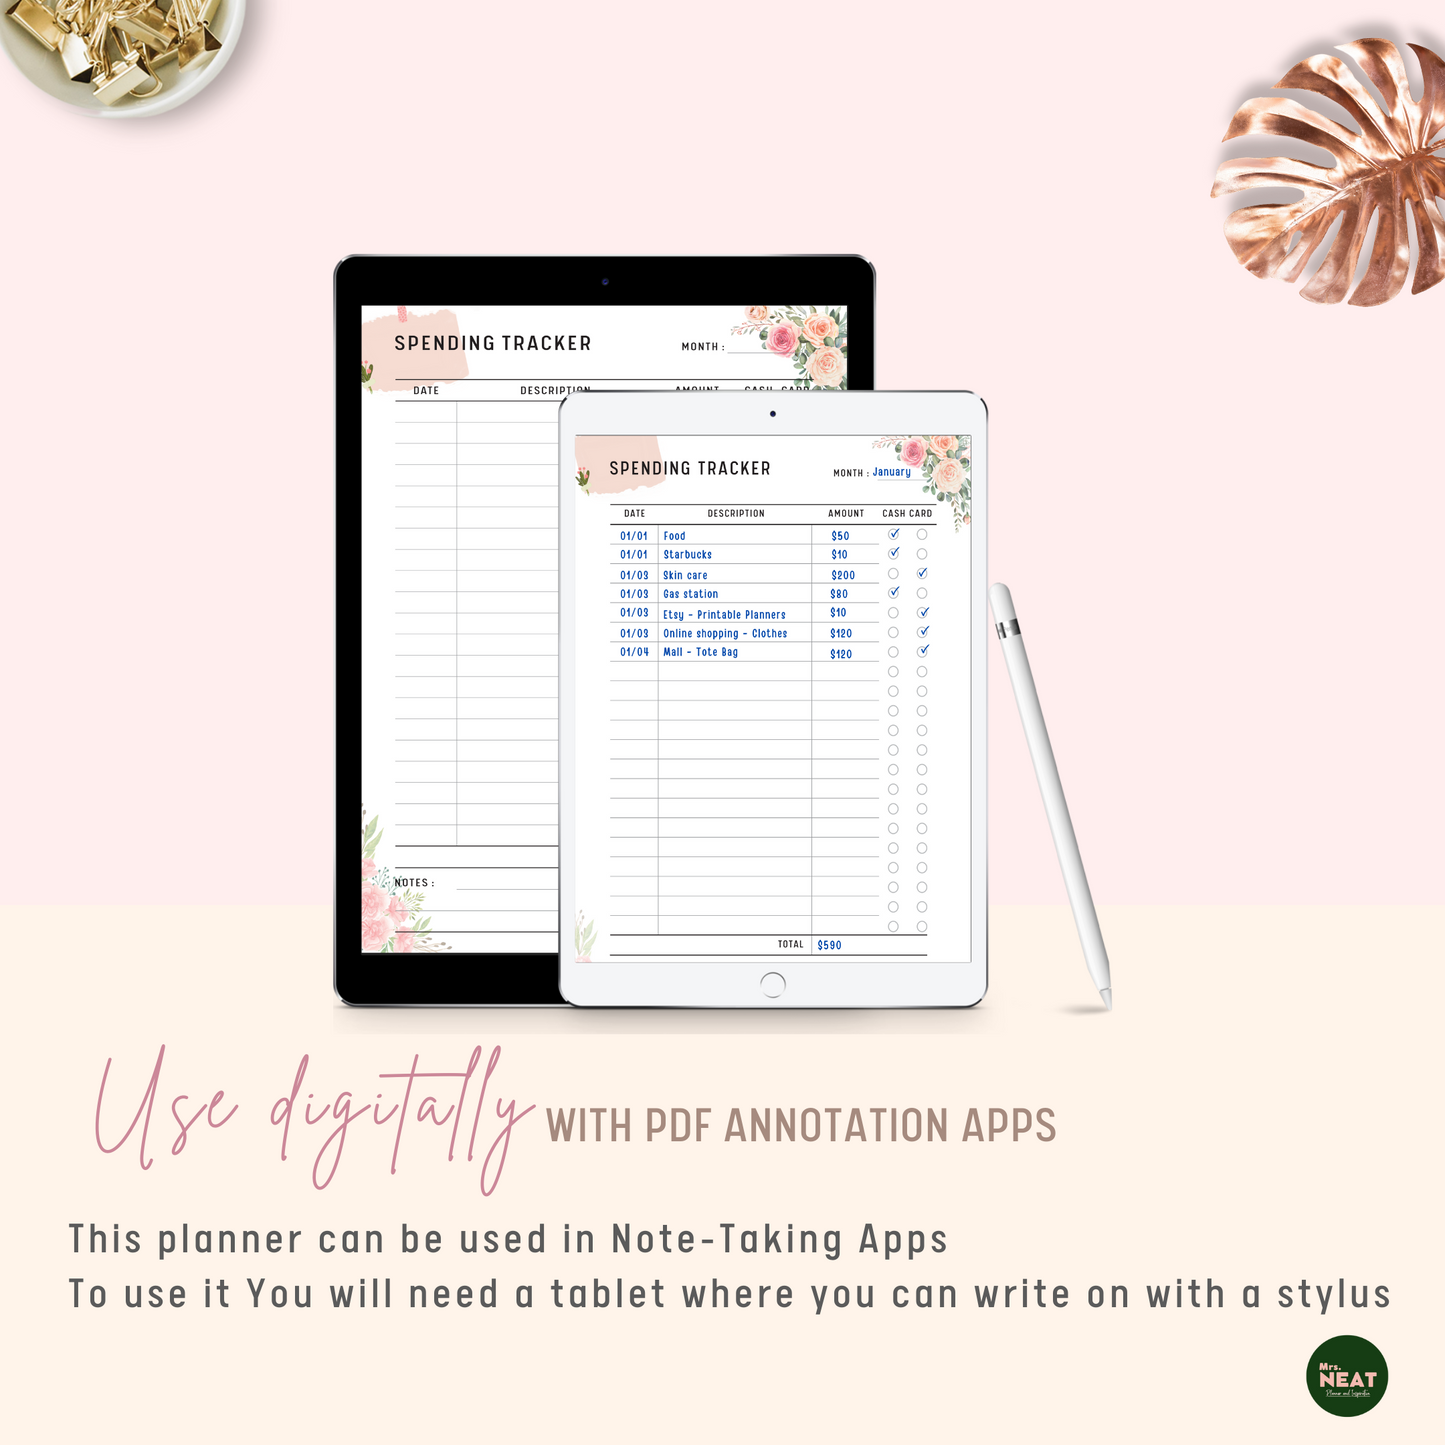 Floral Spending Tracker Planner used Digitally with Tablet and Stylus